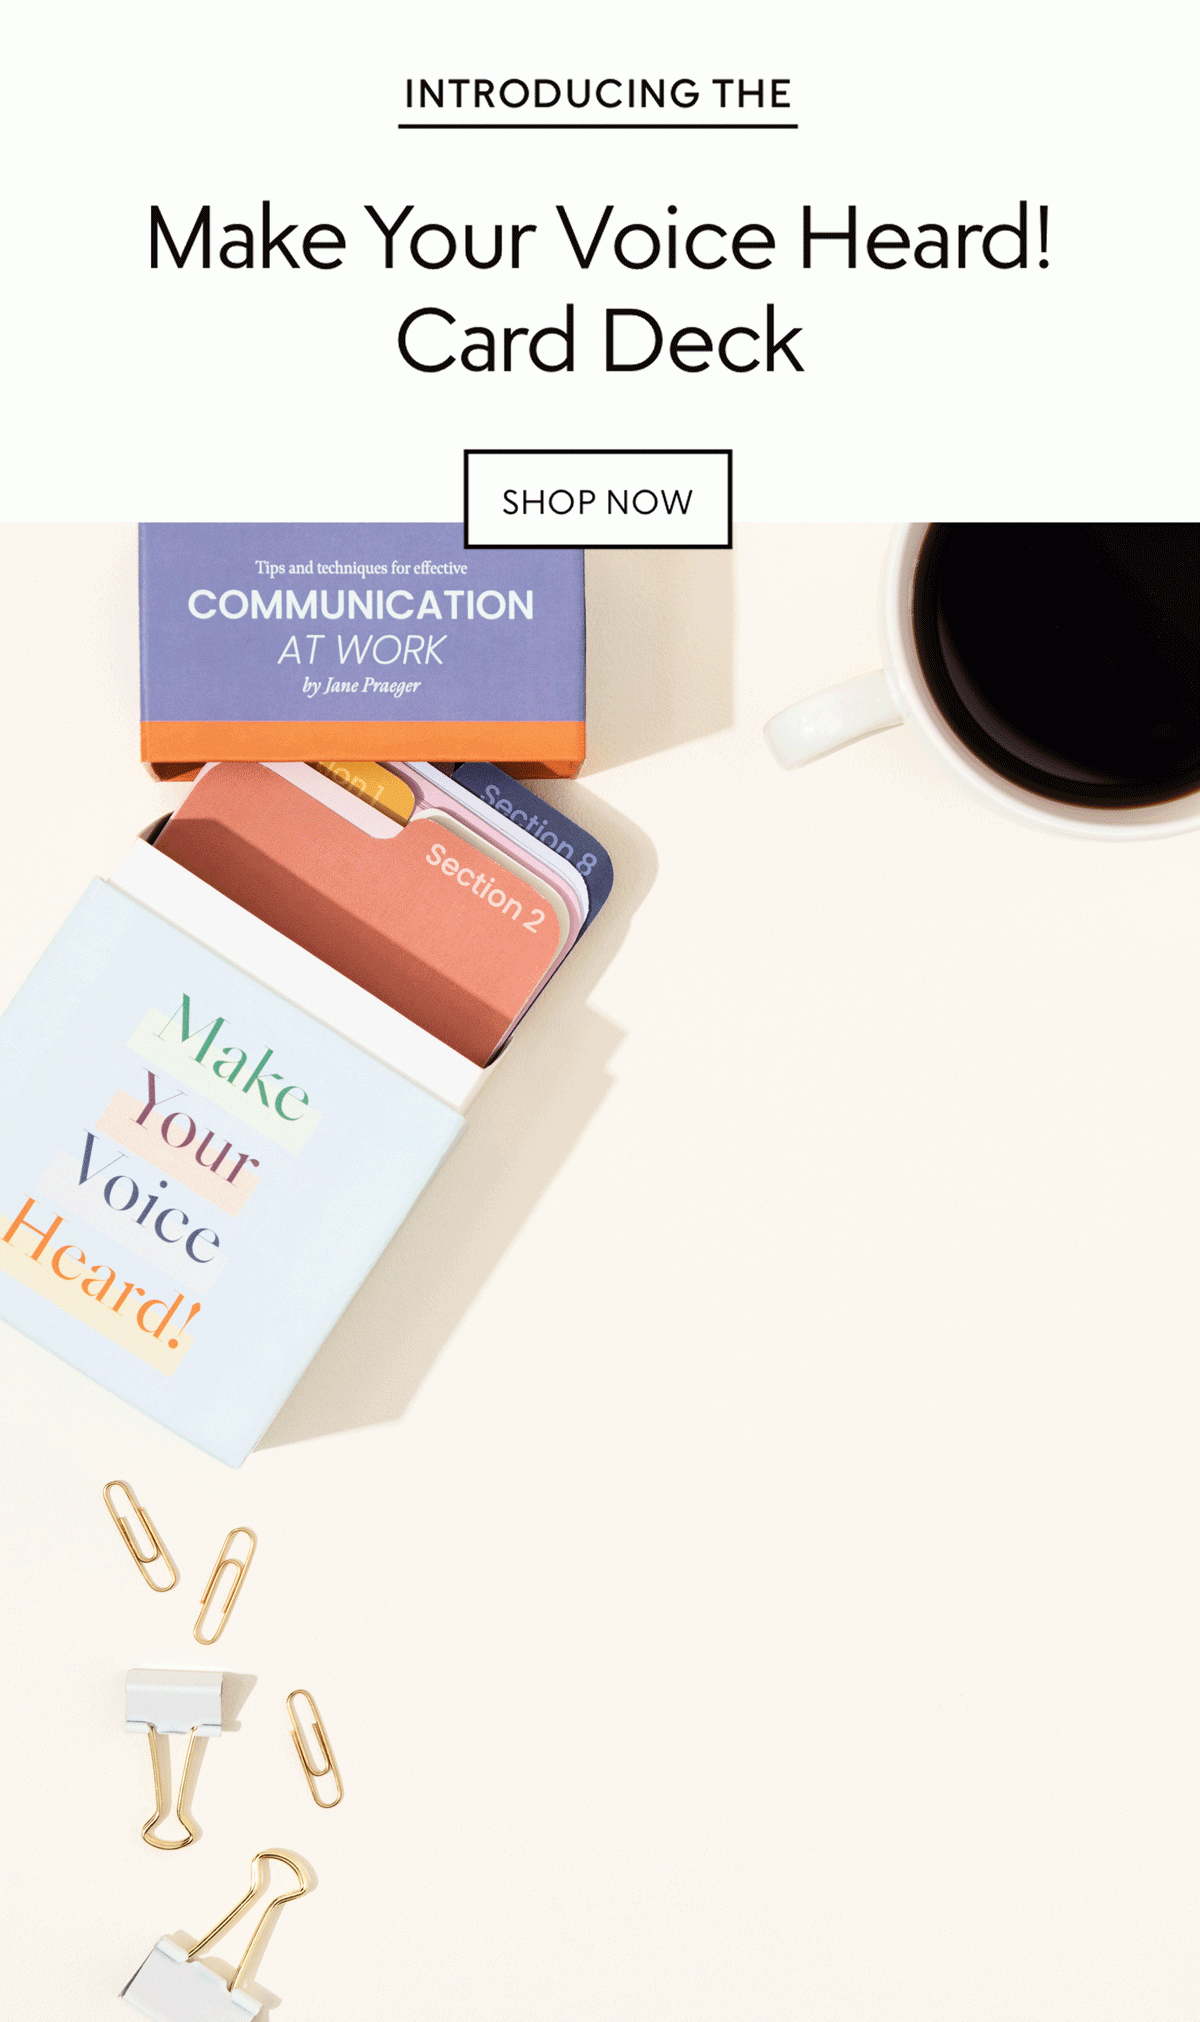 Introducing the Make Your Voice Heard! Card Deck—shop now